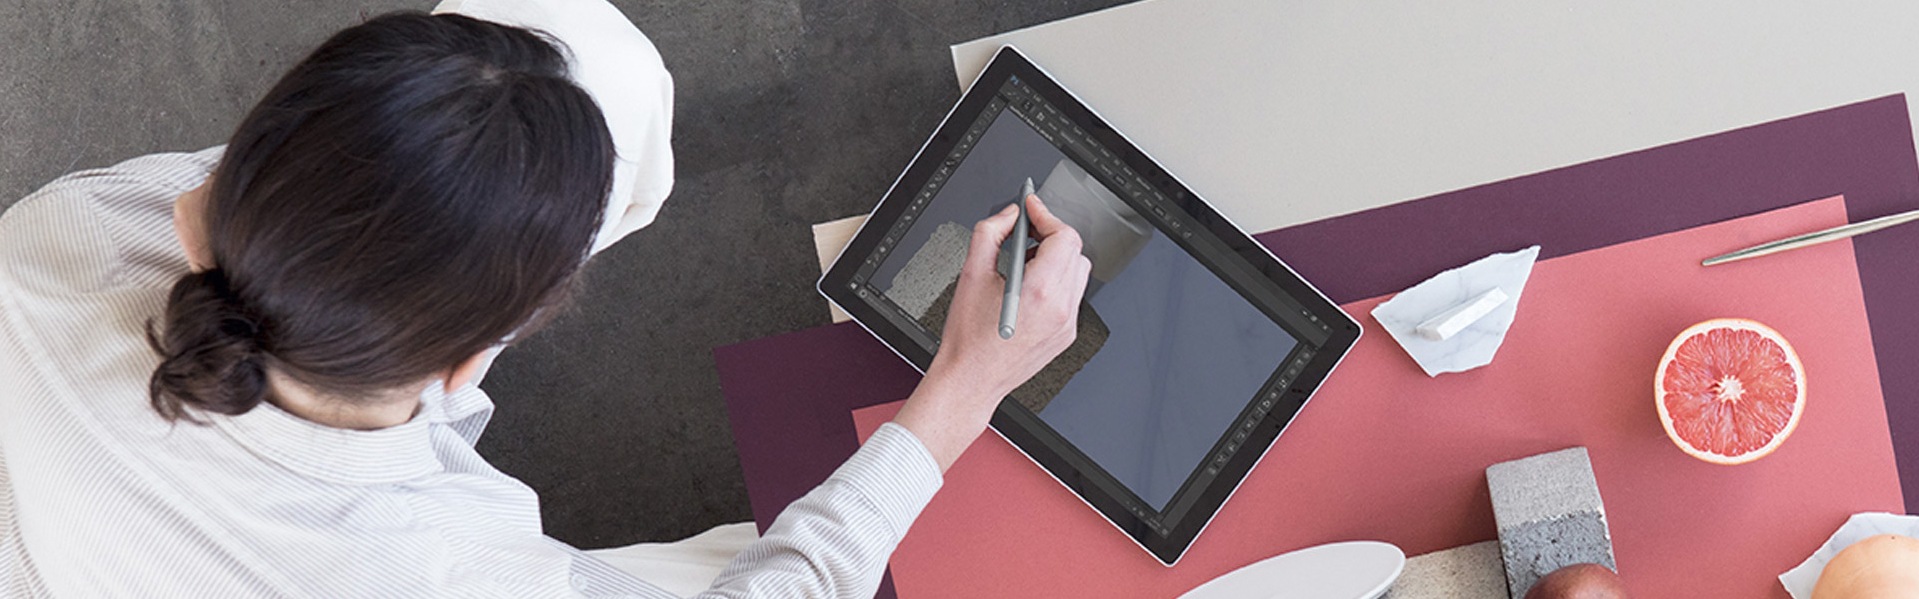 A Person Draws On Their Surface Pro Touchscreen With Surface Pen